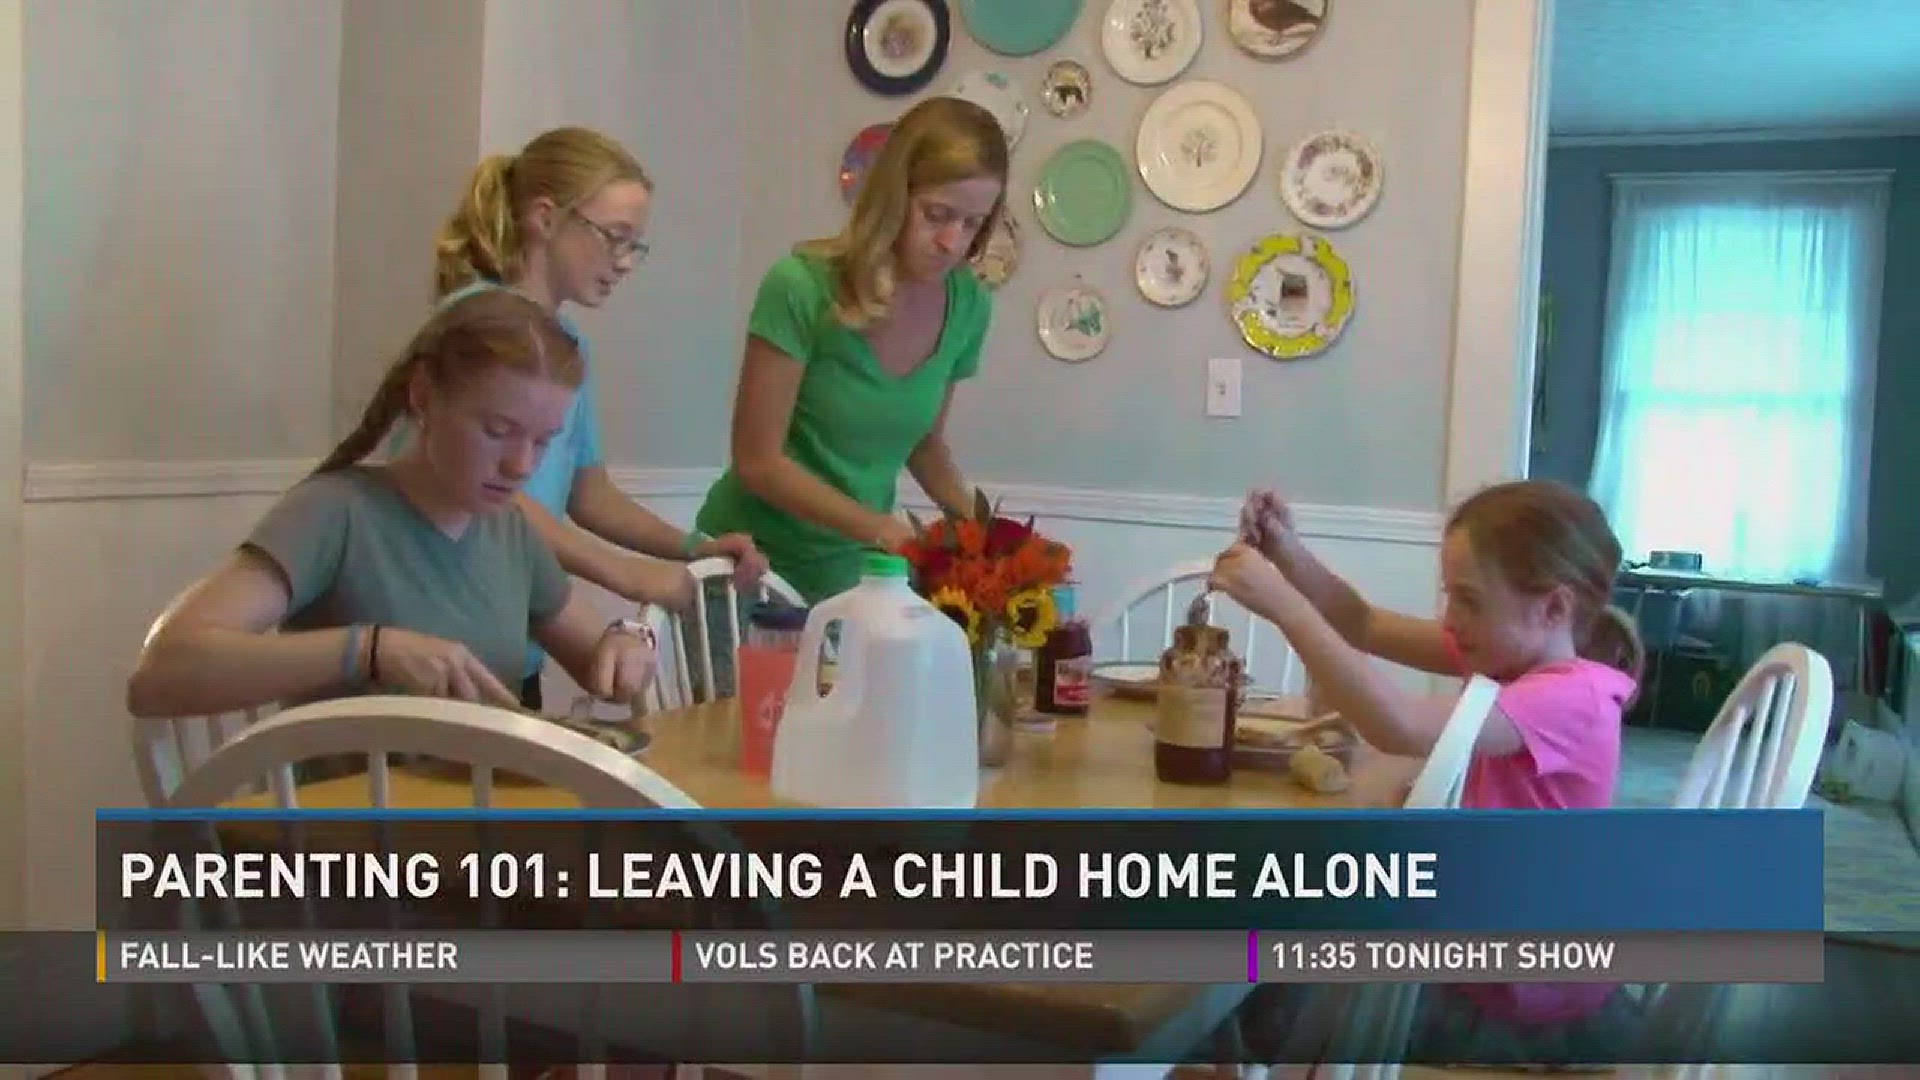 How old is old enough for parents to leave a child home alone?